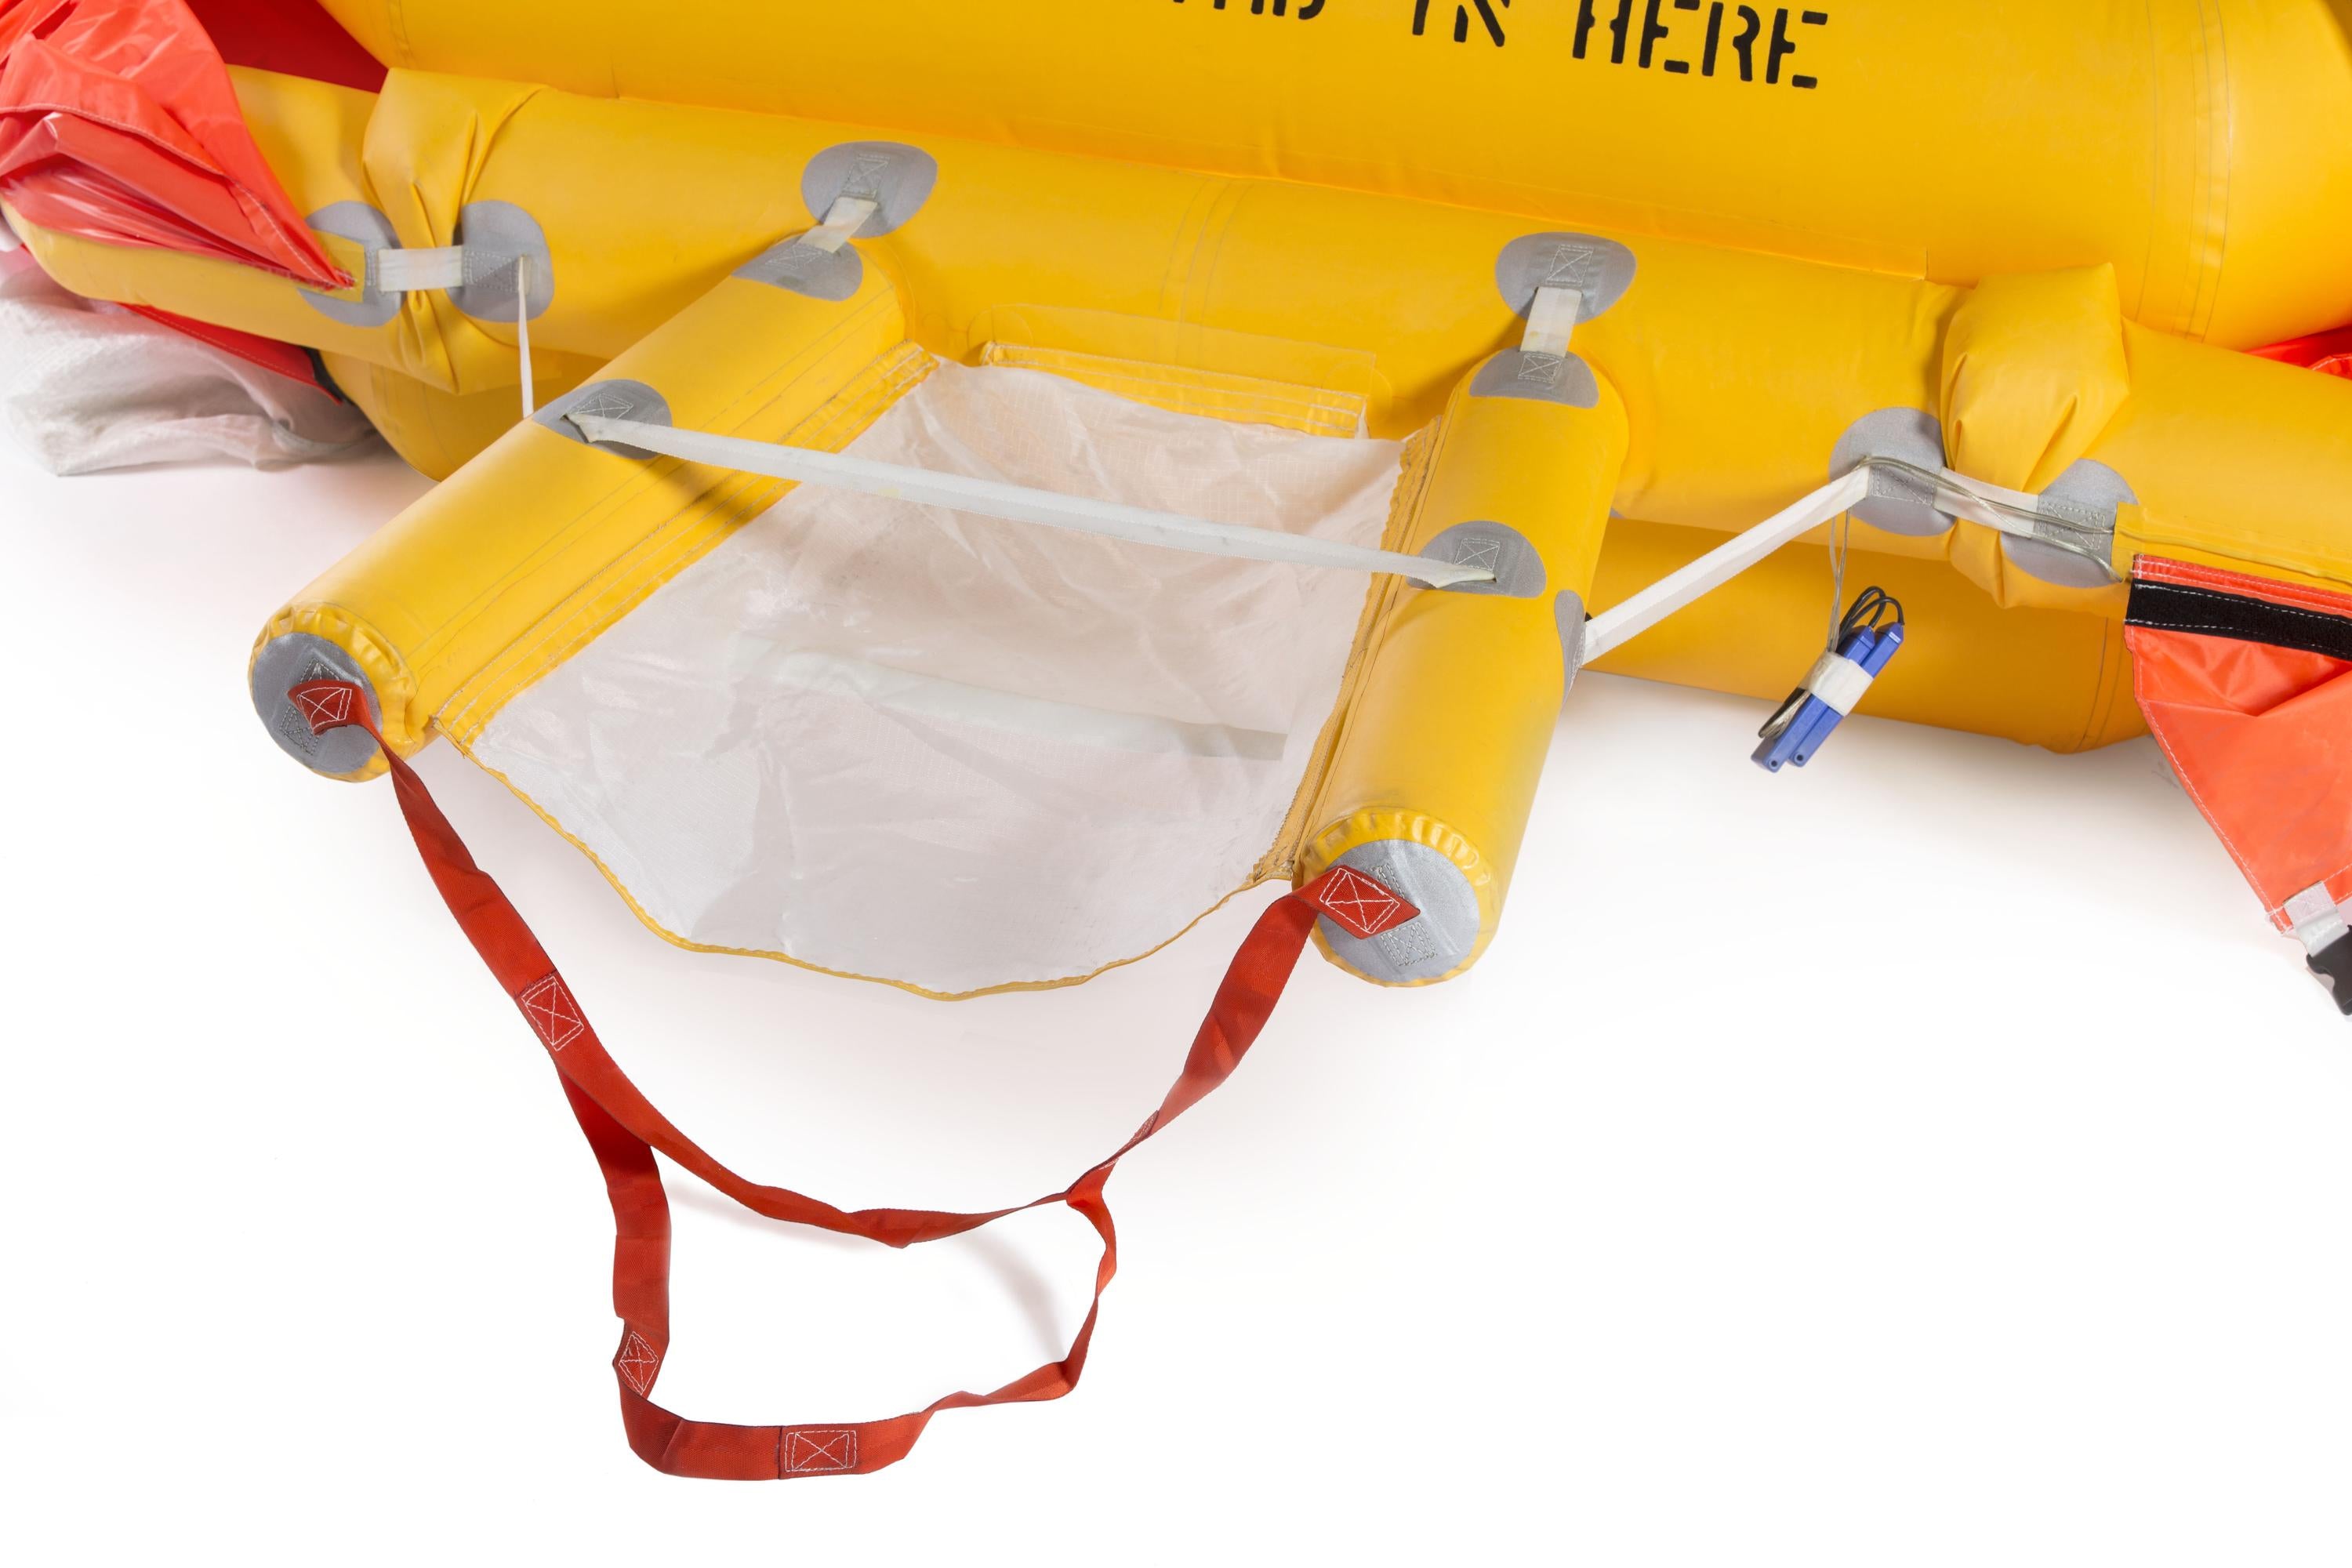 412 replacement mid-float with liferafts, internal hoist compatible 